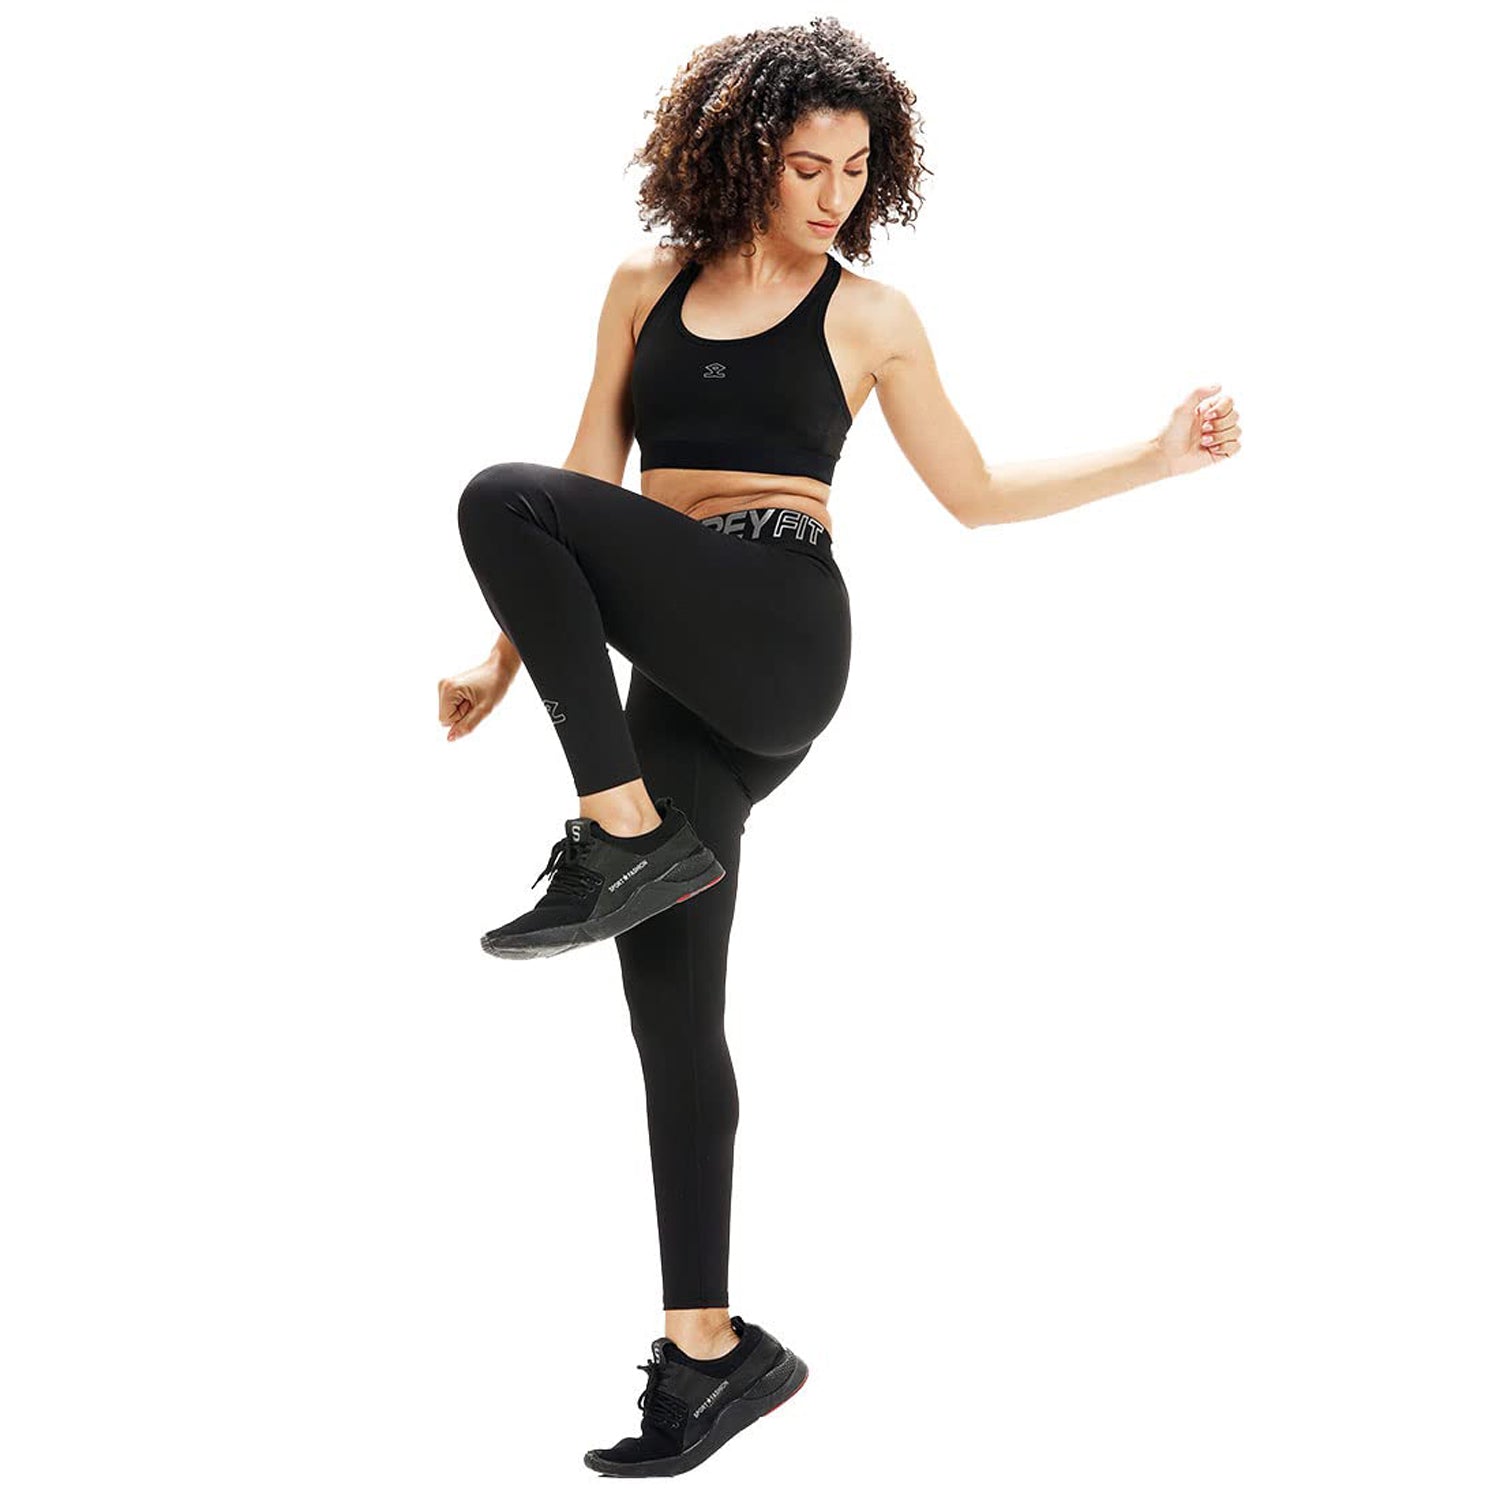 The 9 best women's leggings we tested in 2023: Our review